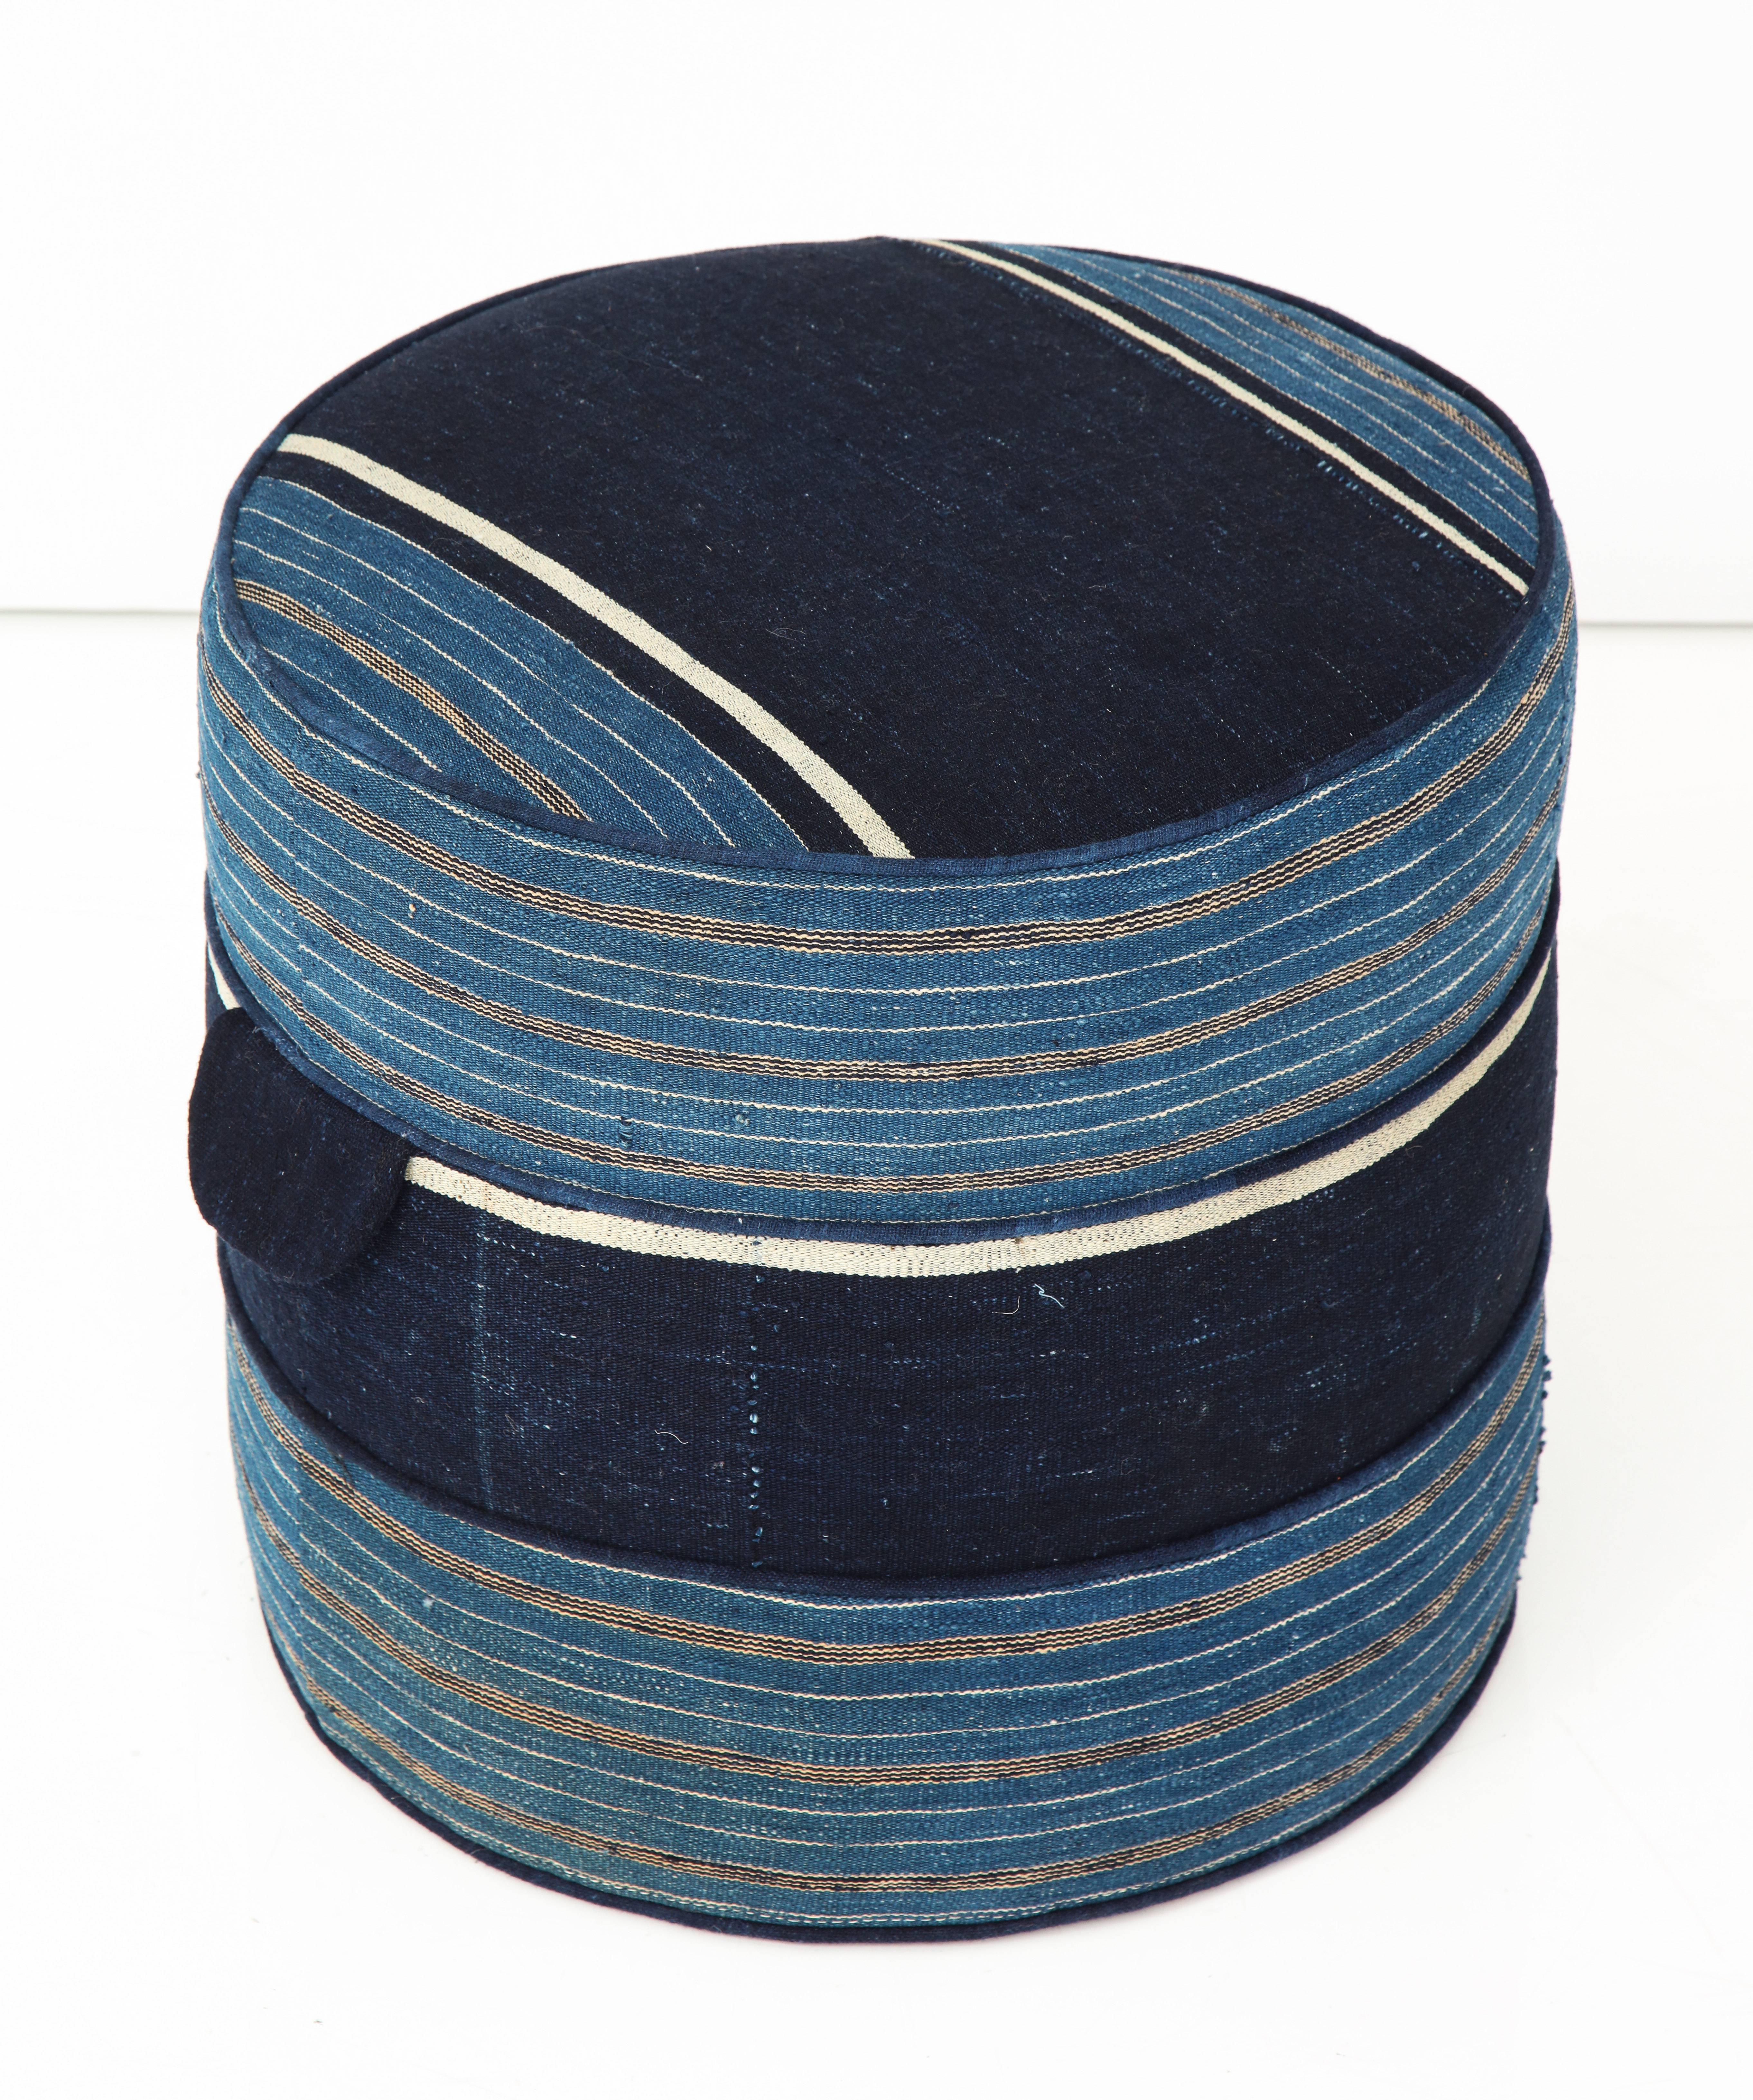 NK Collection Small Round Hassock Upholstered in Indigo African Fabric 1